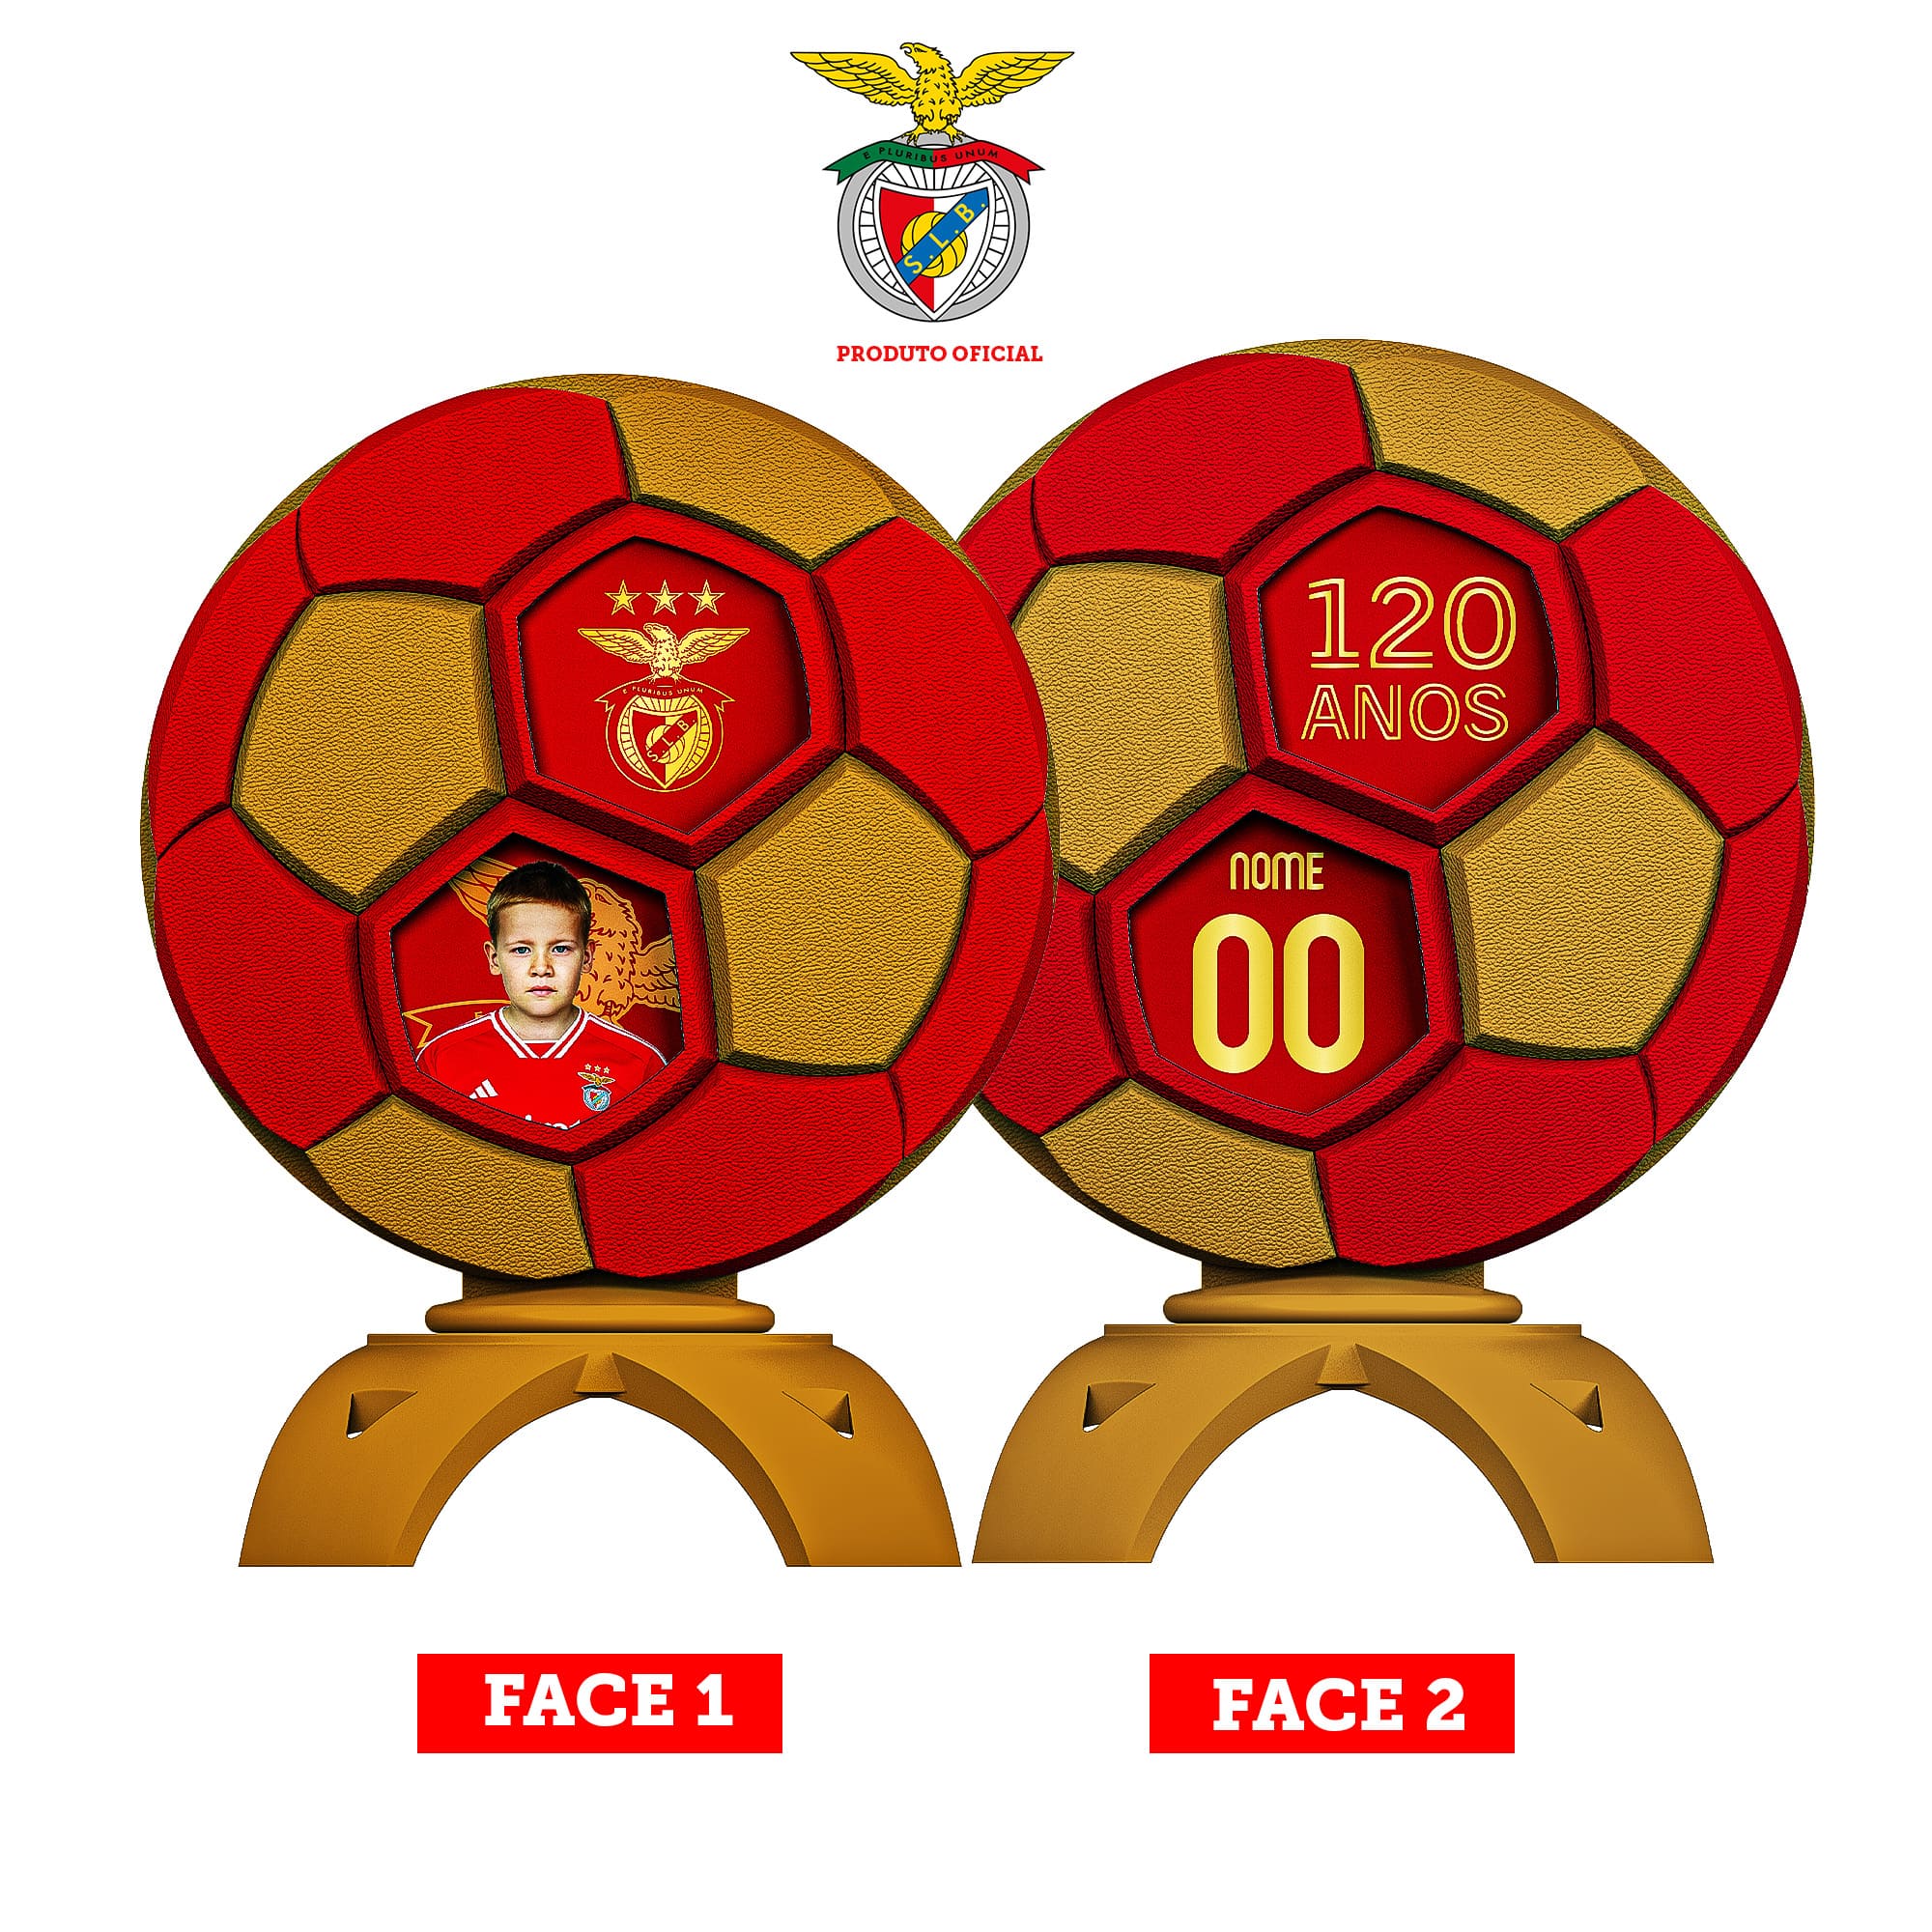 Create your officially licensed Benfica Lisbon trophy - 120 Anos